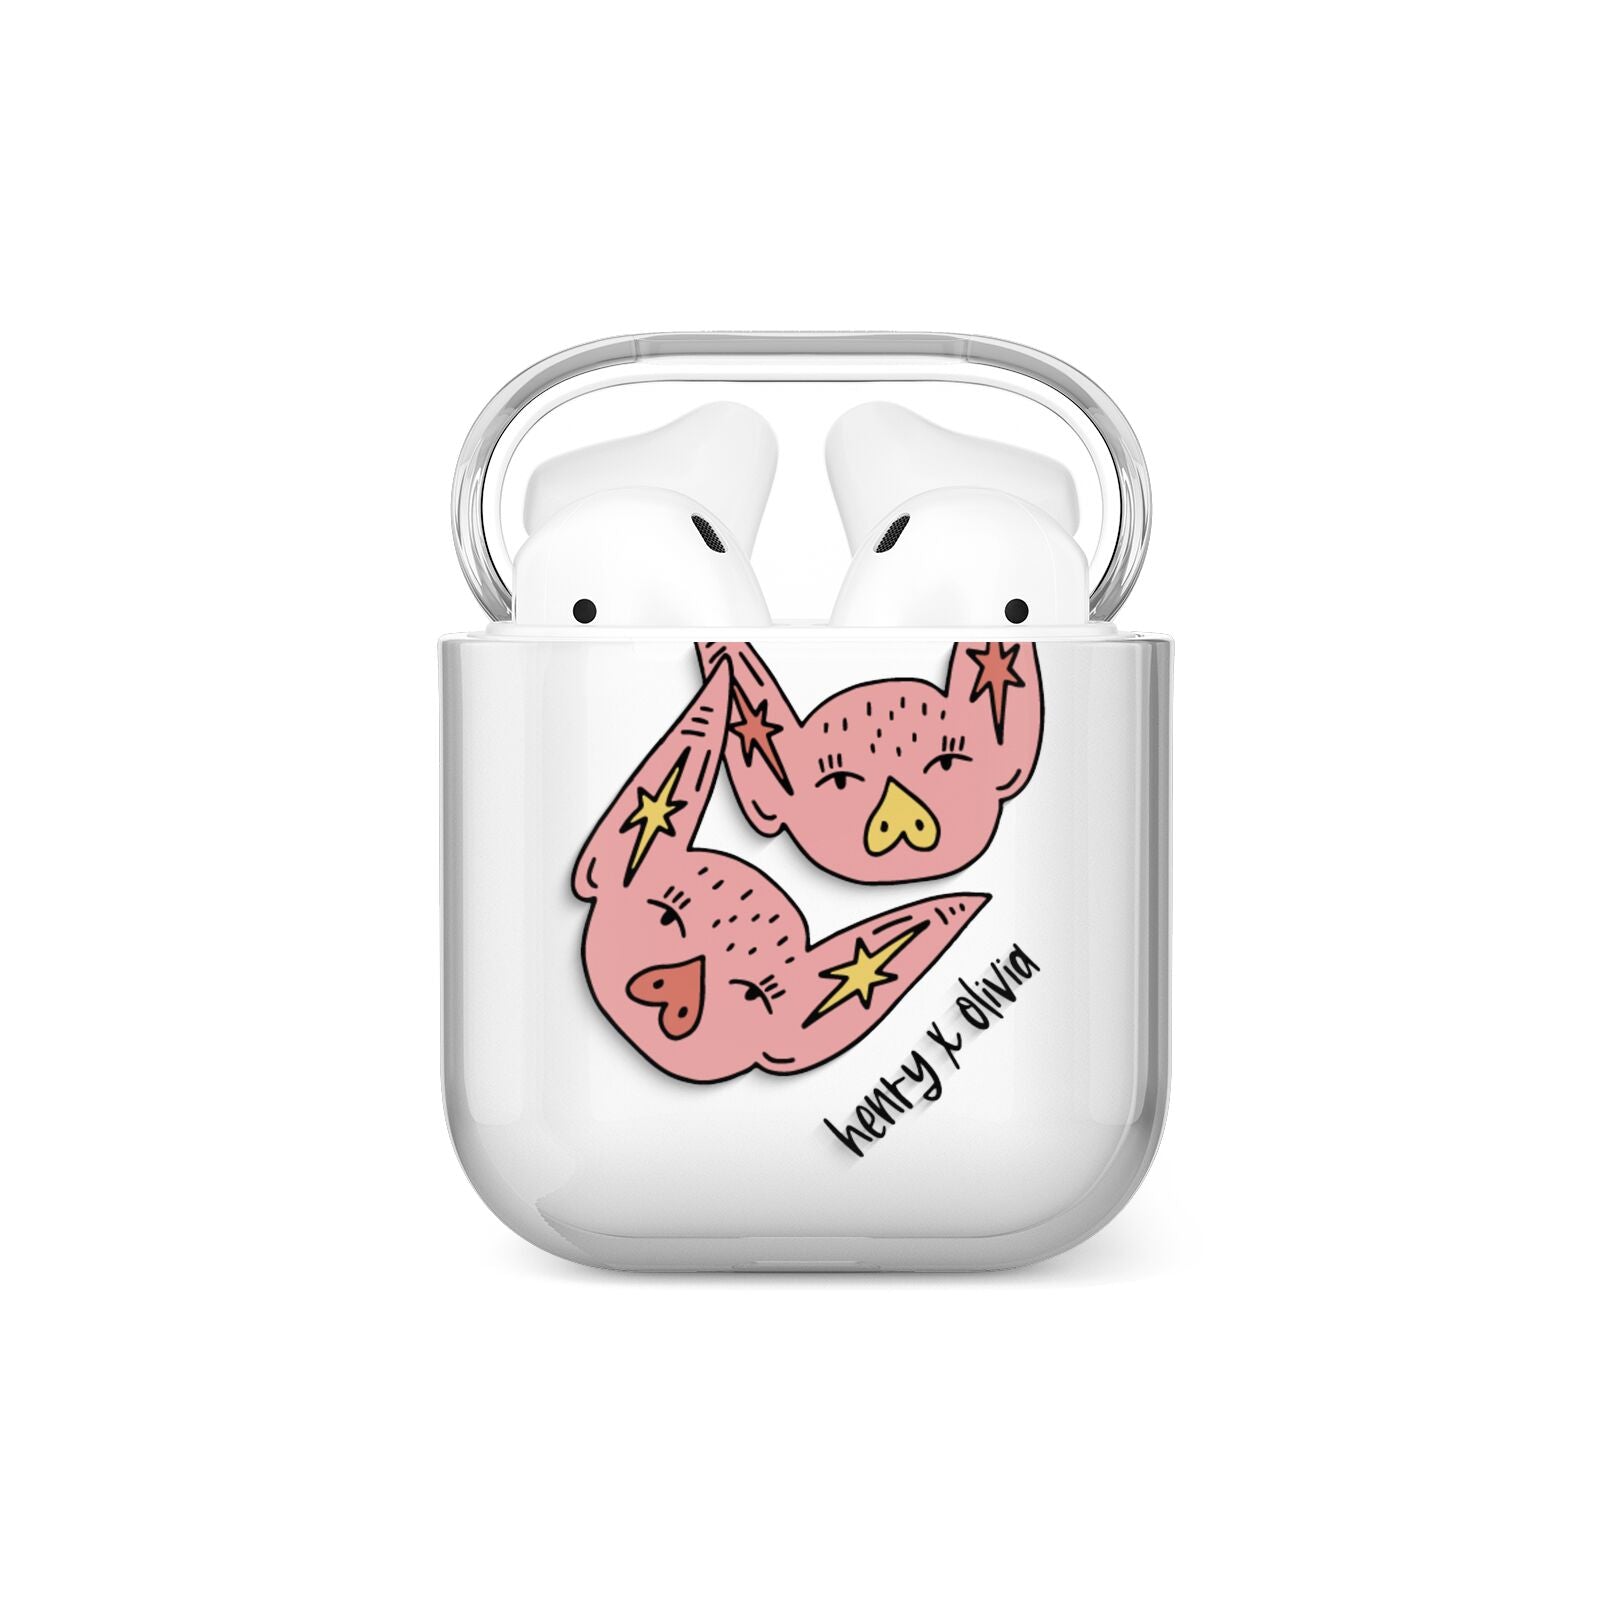 Pink Pigs Couple AirPods Case